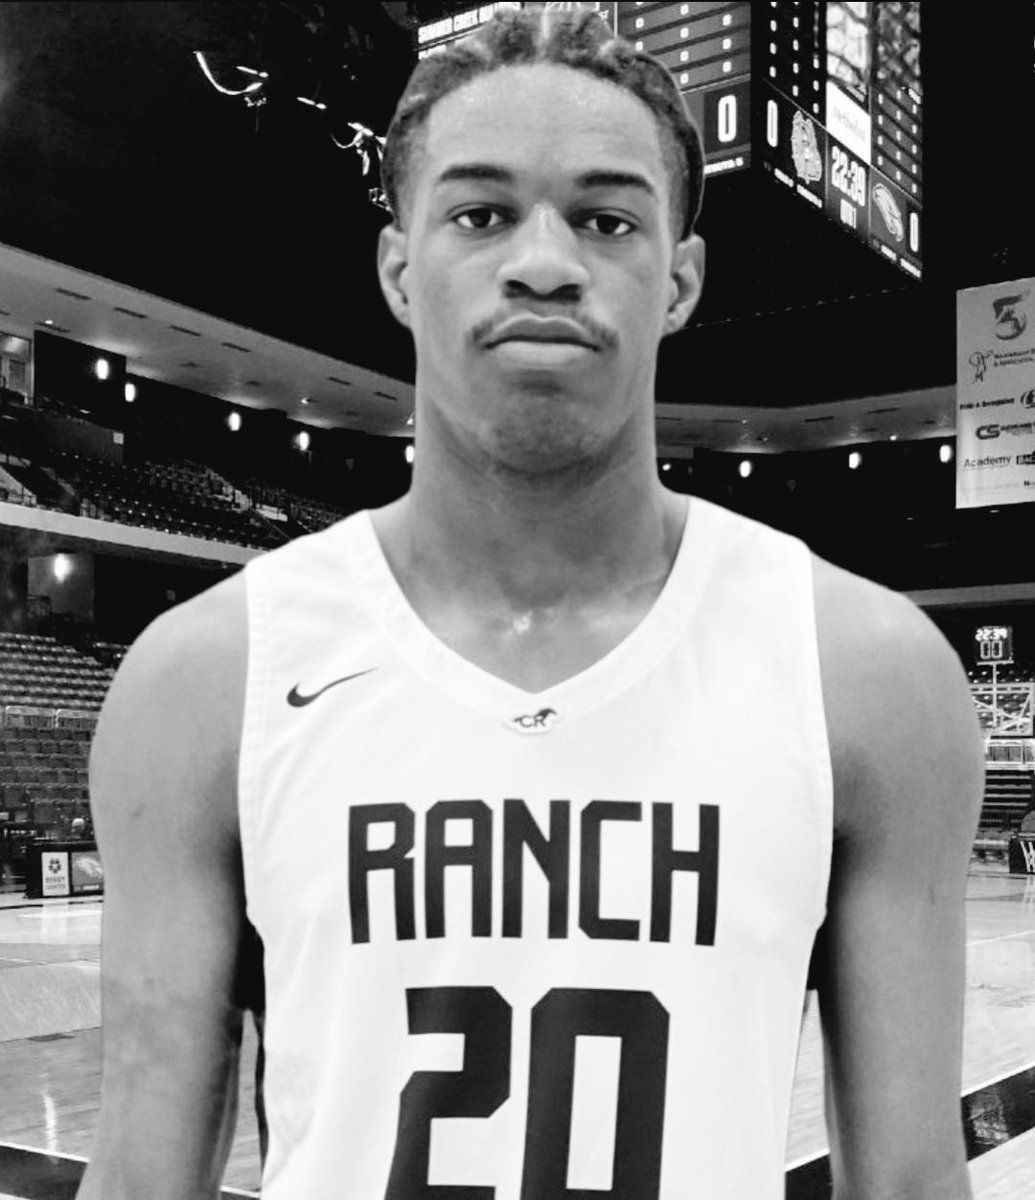 🔥🔥Top 100 Texas Wing, 6'5' Chris Tippins @Chris2official from @cyranchbhoops helps carry his team to Round 4 of the TEXAS PLAYOFFS 20 points🔸️8 rebounds (2 three's) Keep going Chris & @cyranchbhoops! @4YFilms @Extraeyesmedia @vypehouston @713HSHoops @RcsSports @TexasTop100